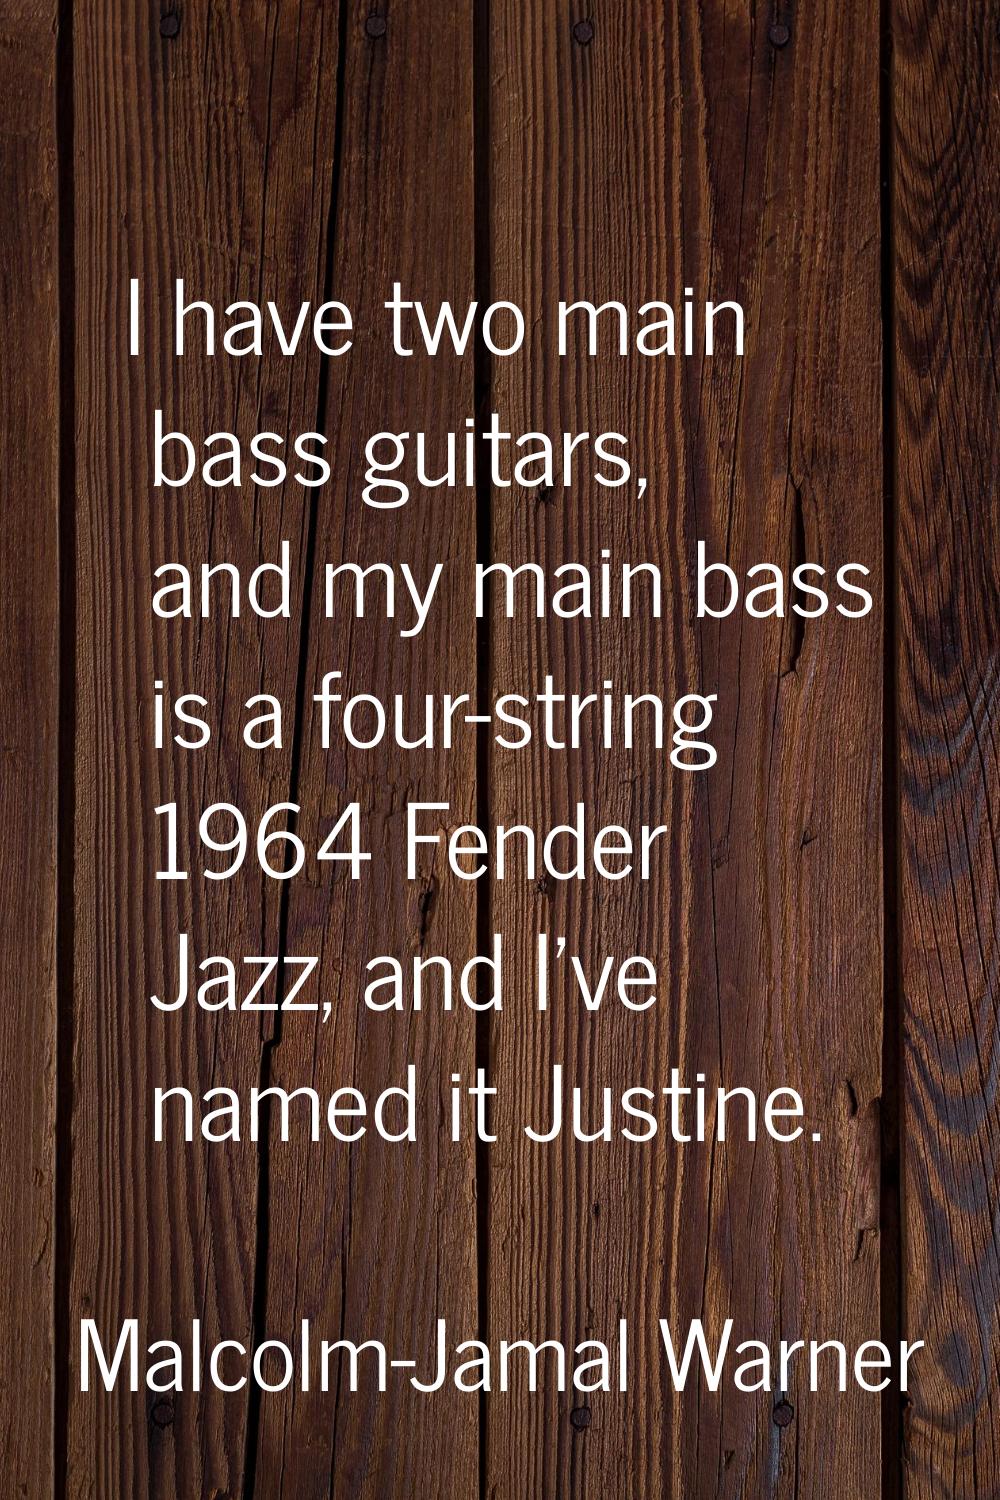 I have two main bass guitars, and my main bass is a four-string 1964 Fender Jazz, and I've named it